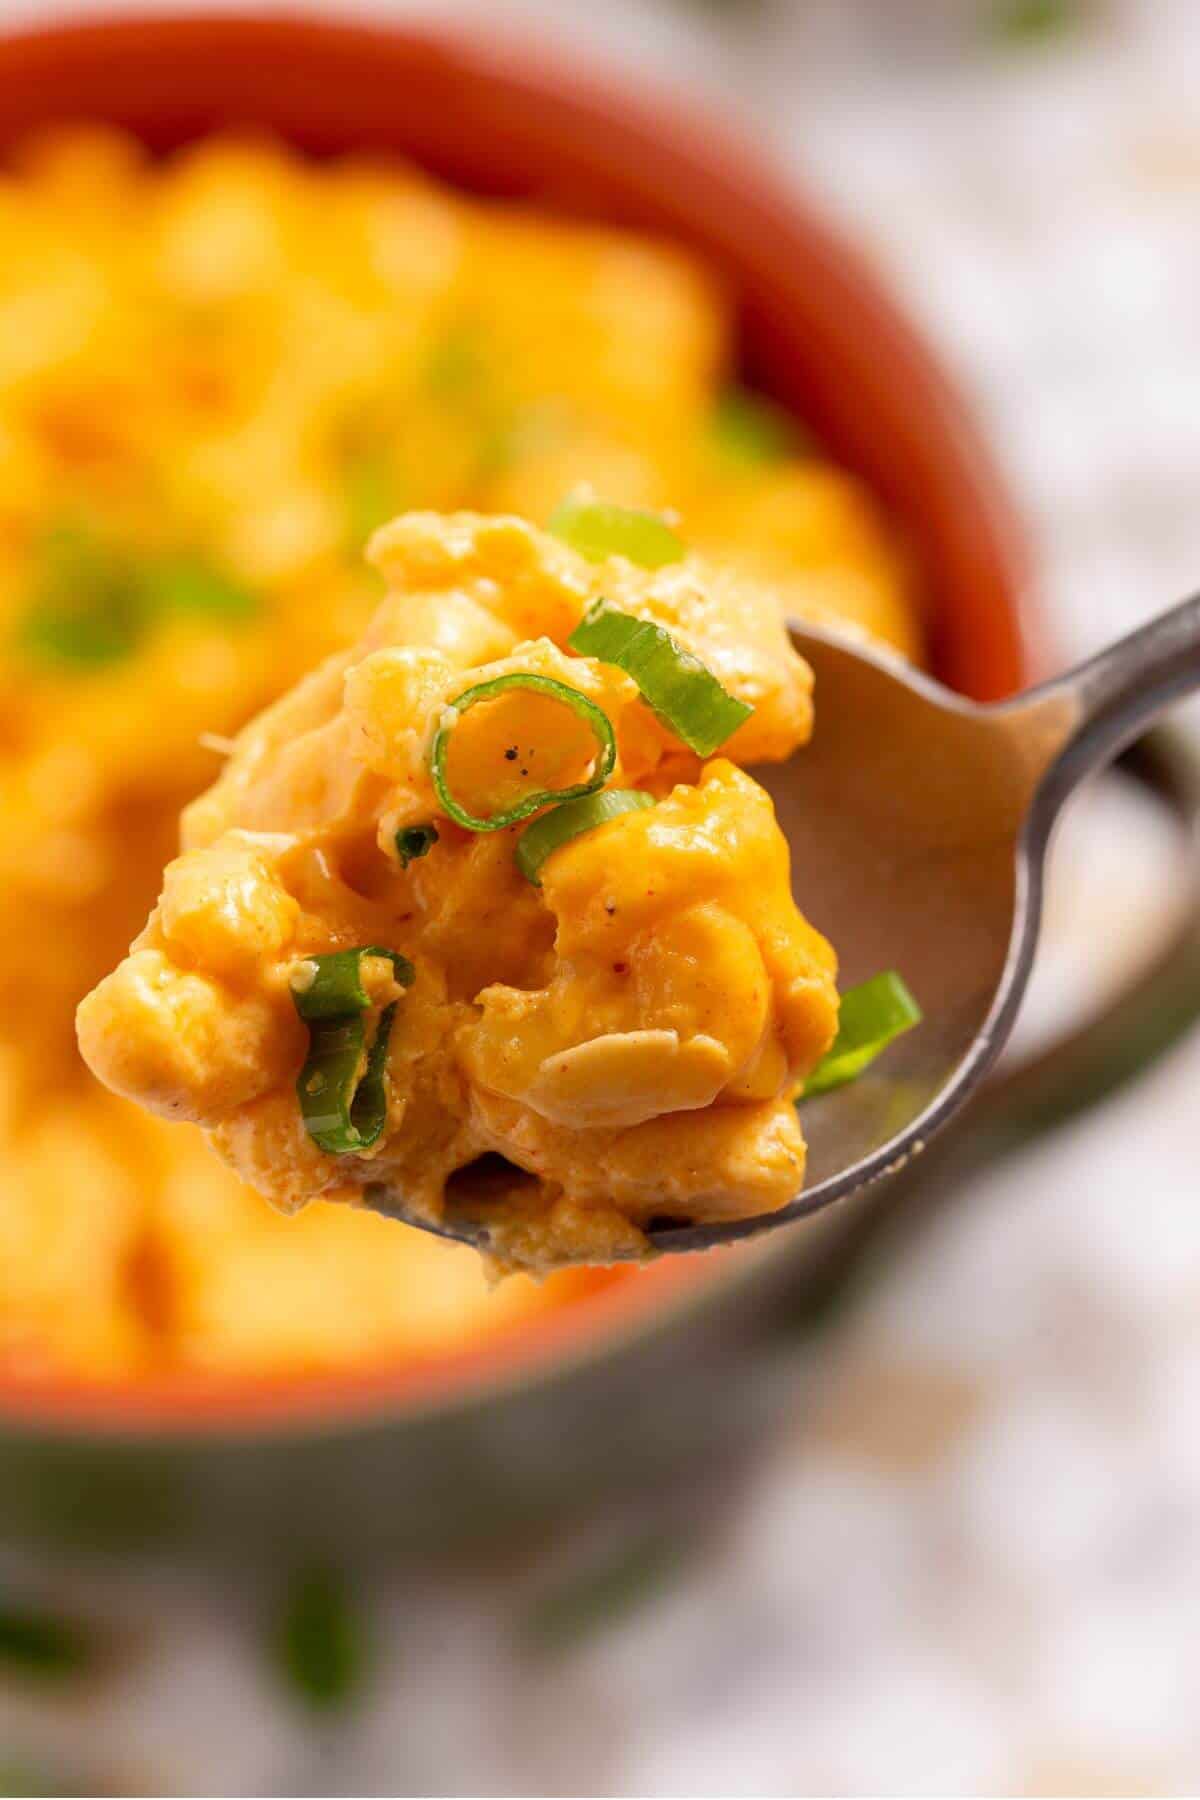 Cheesy macaroni and cheese on a spoon.